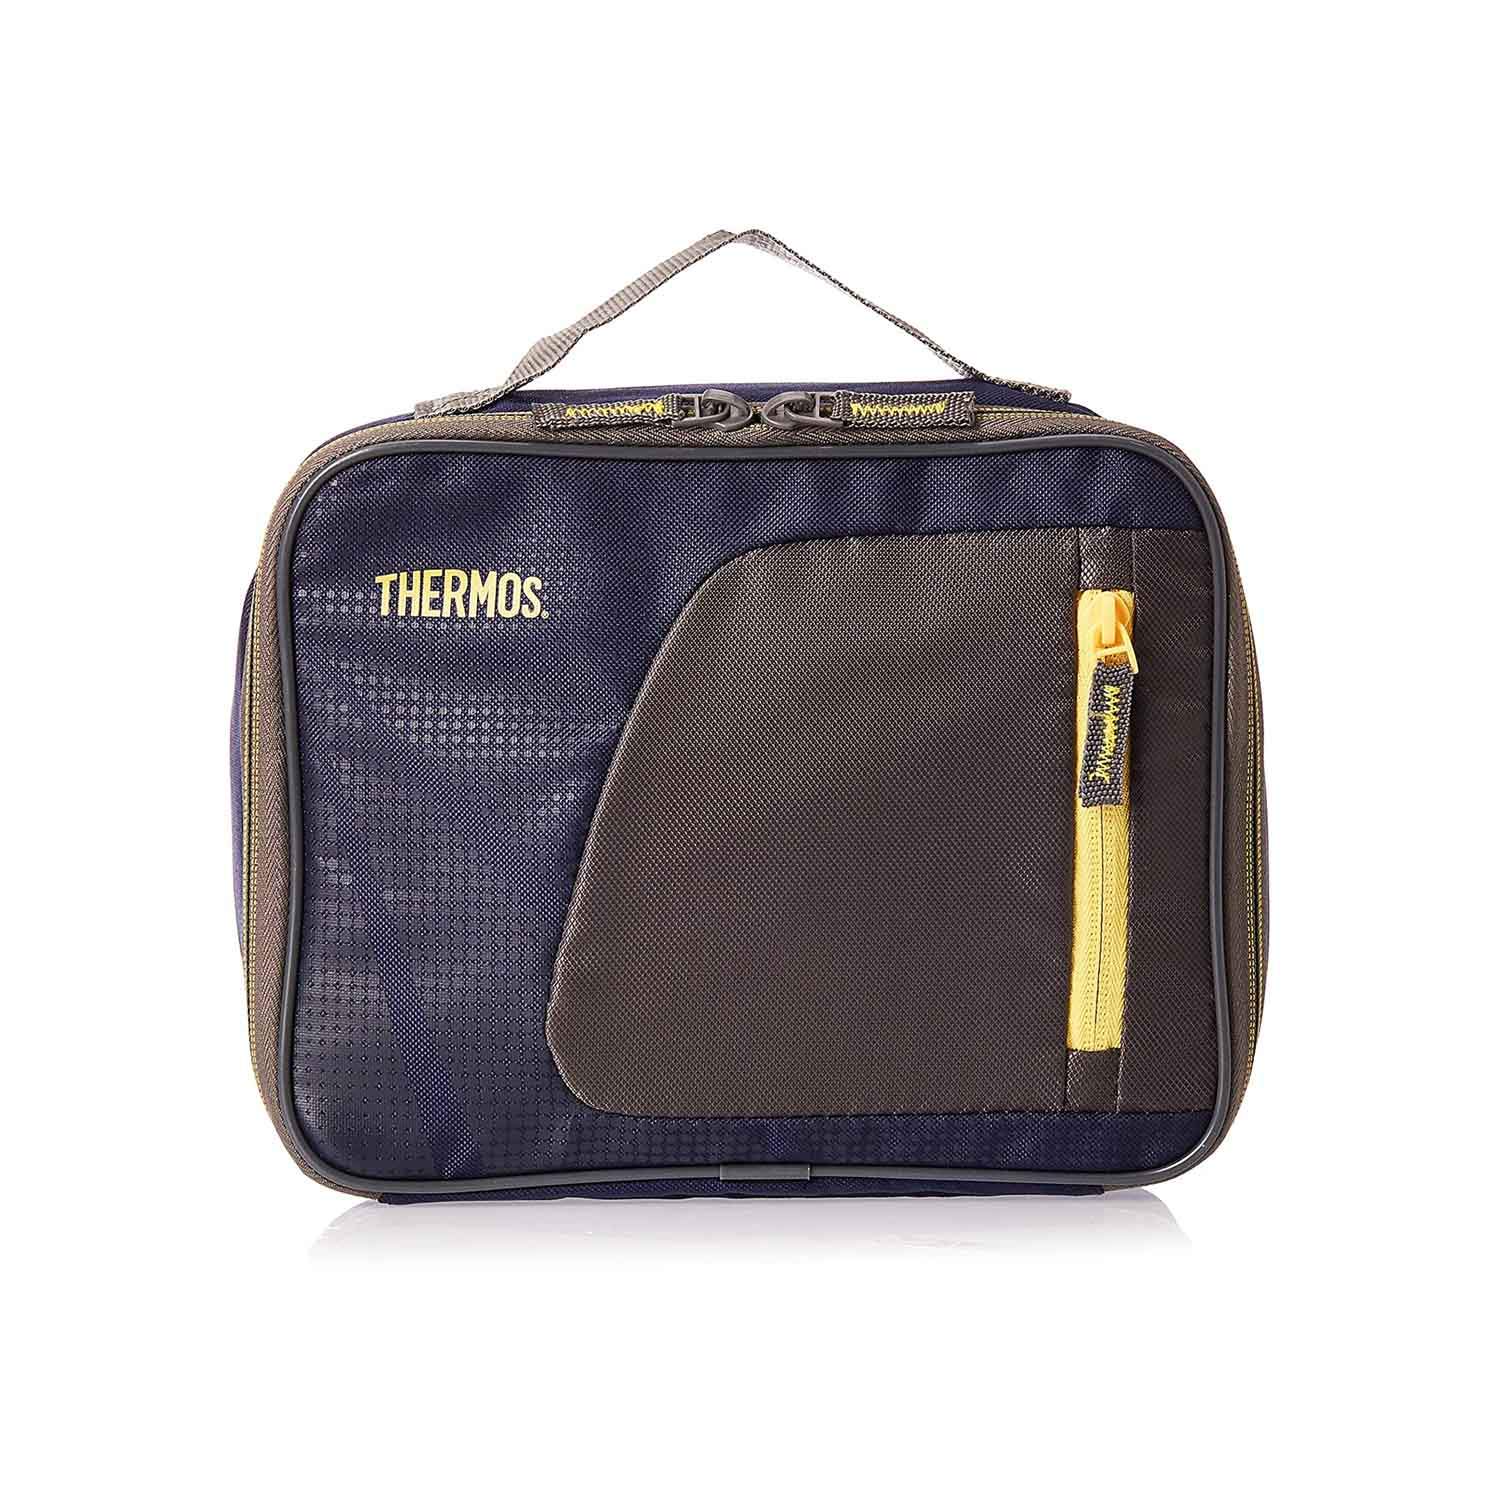 Thermos-Radiance-Lunch Kit-Navy/Yellow